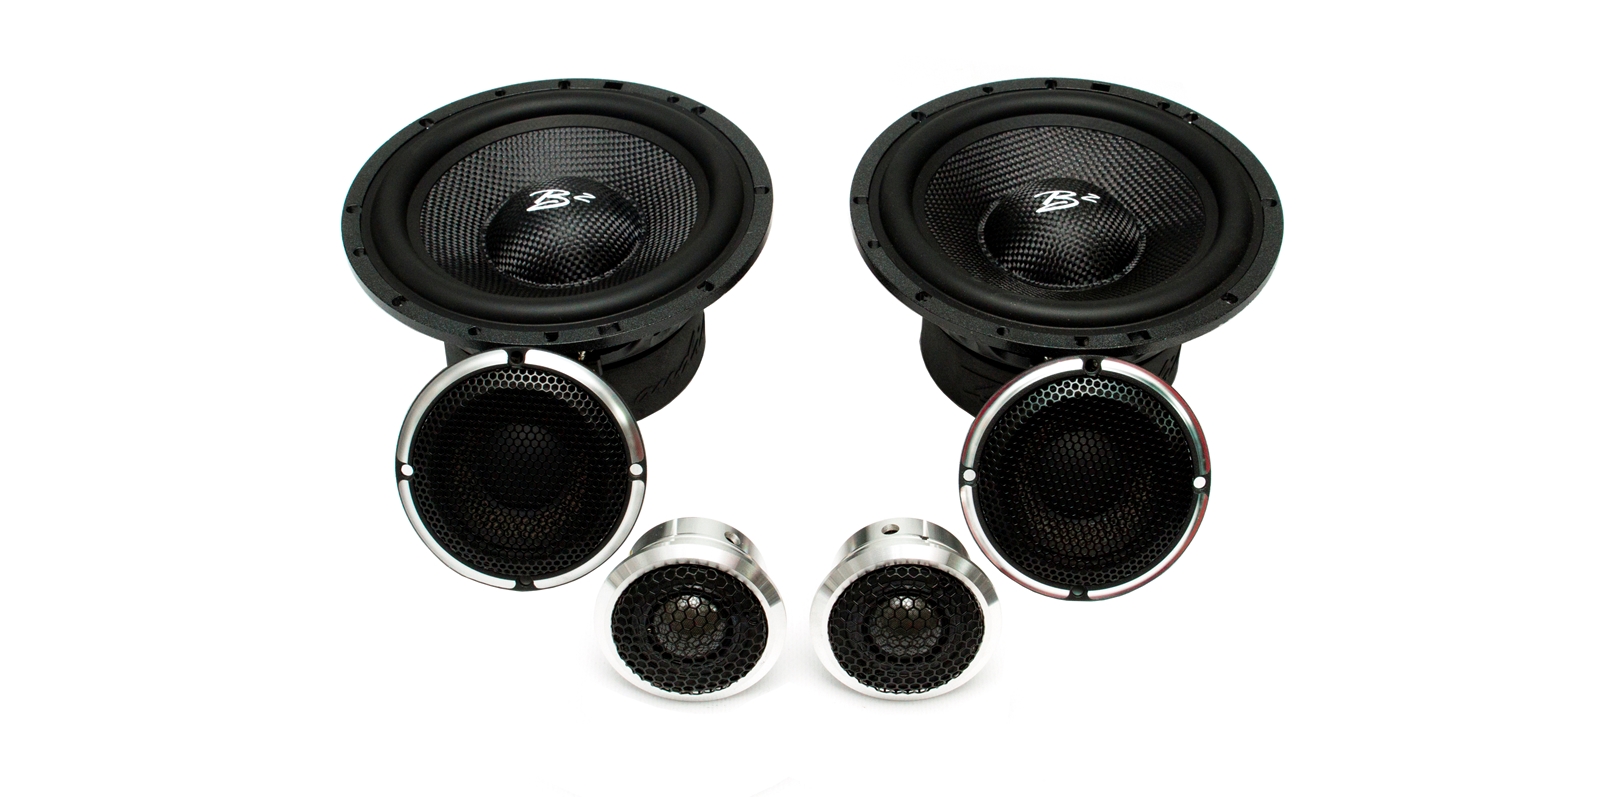 true sound reference speakers